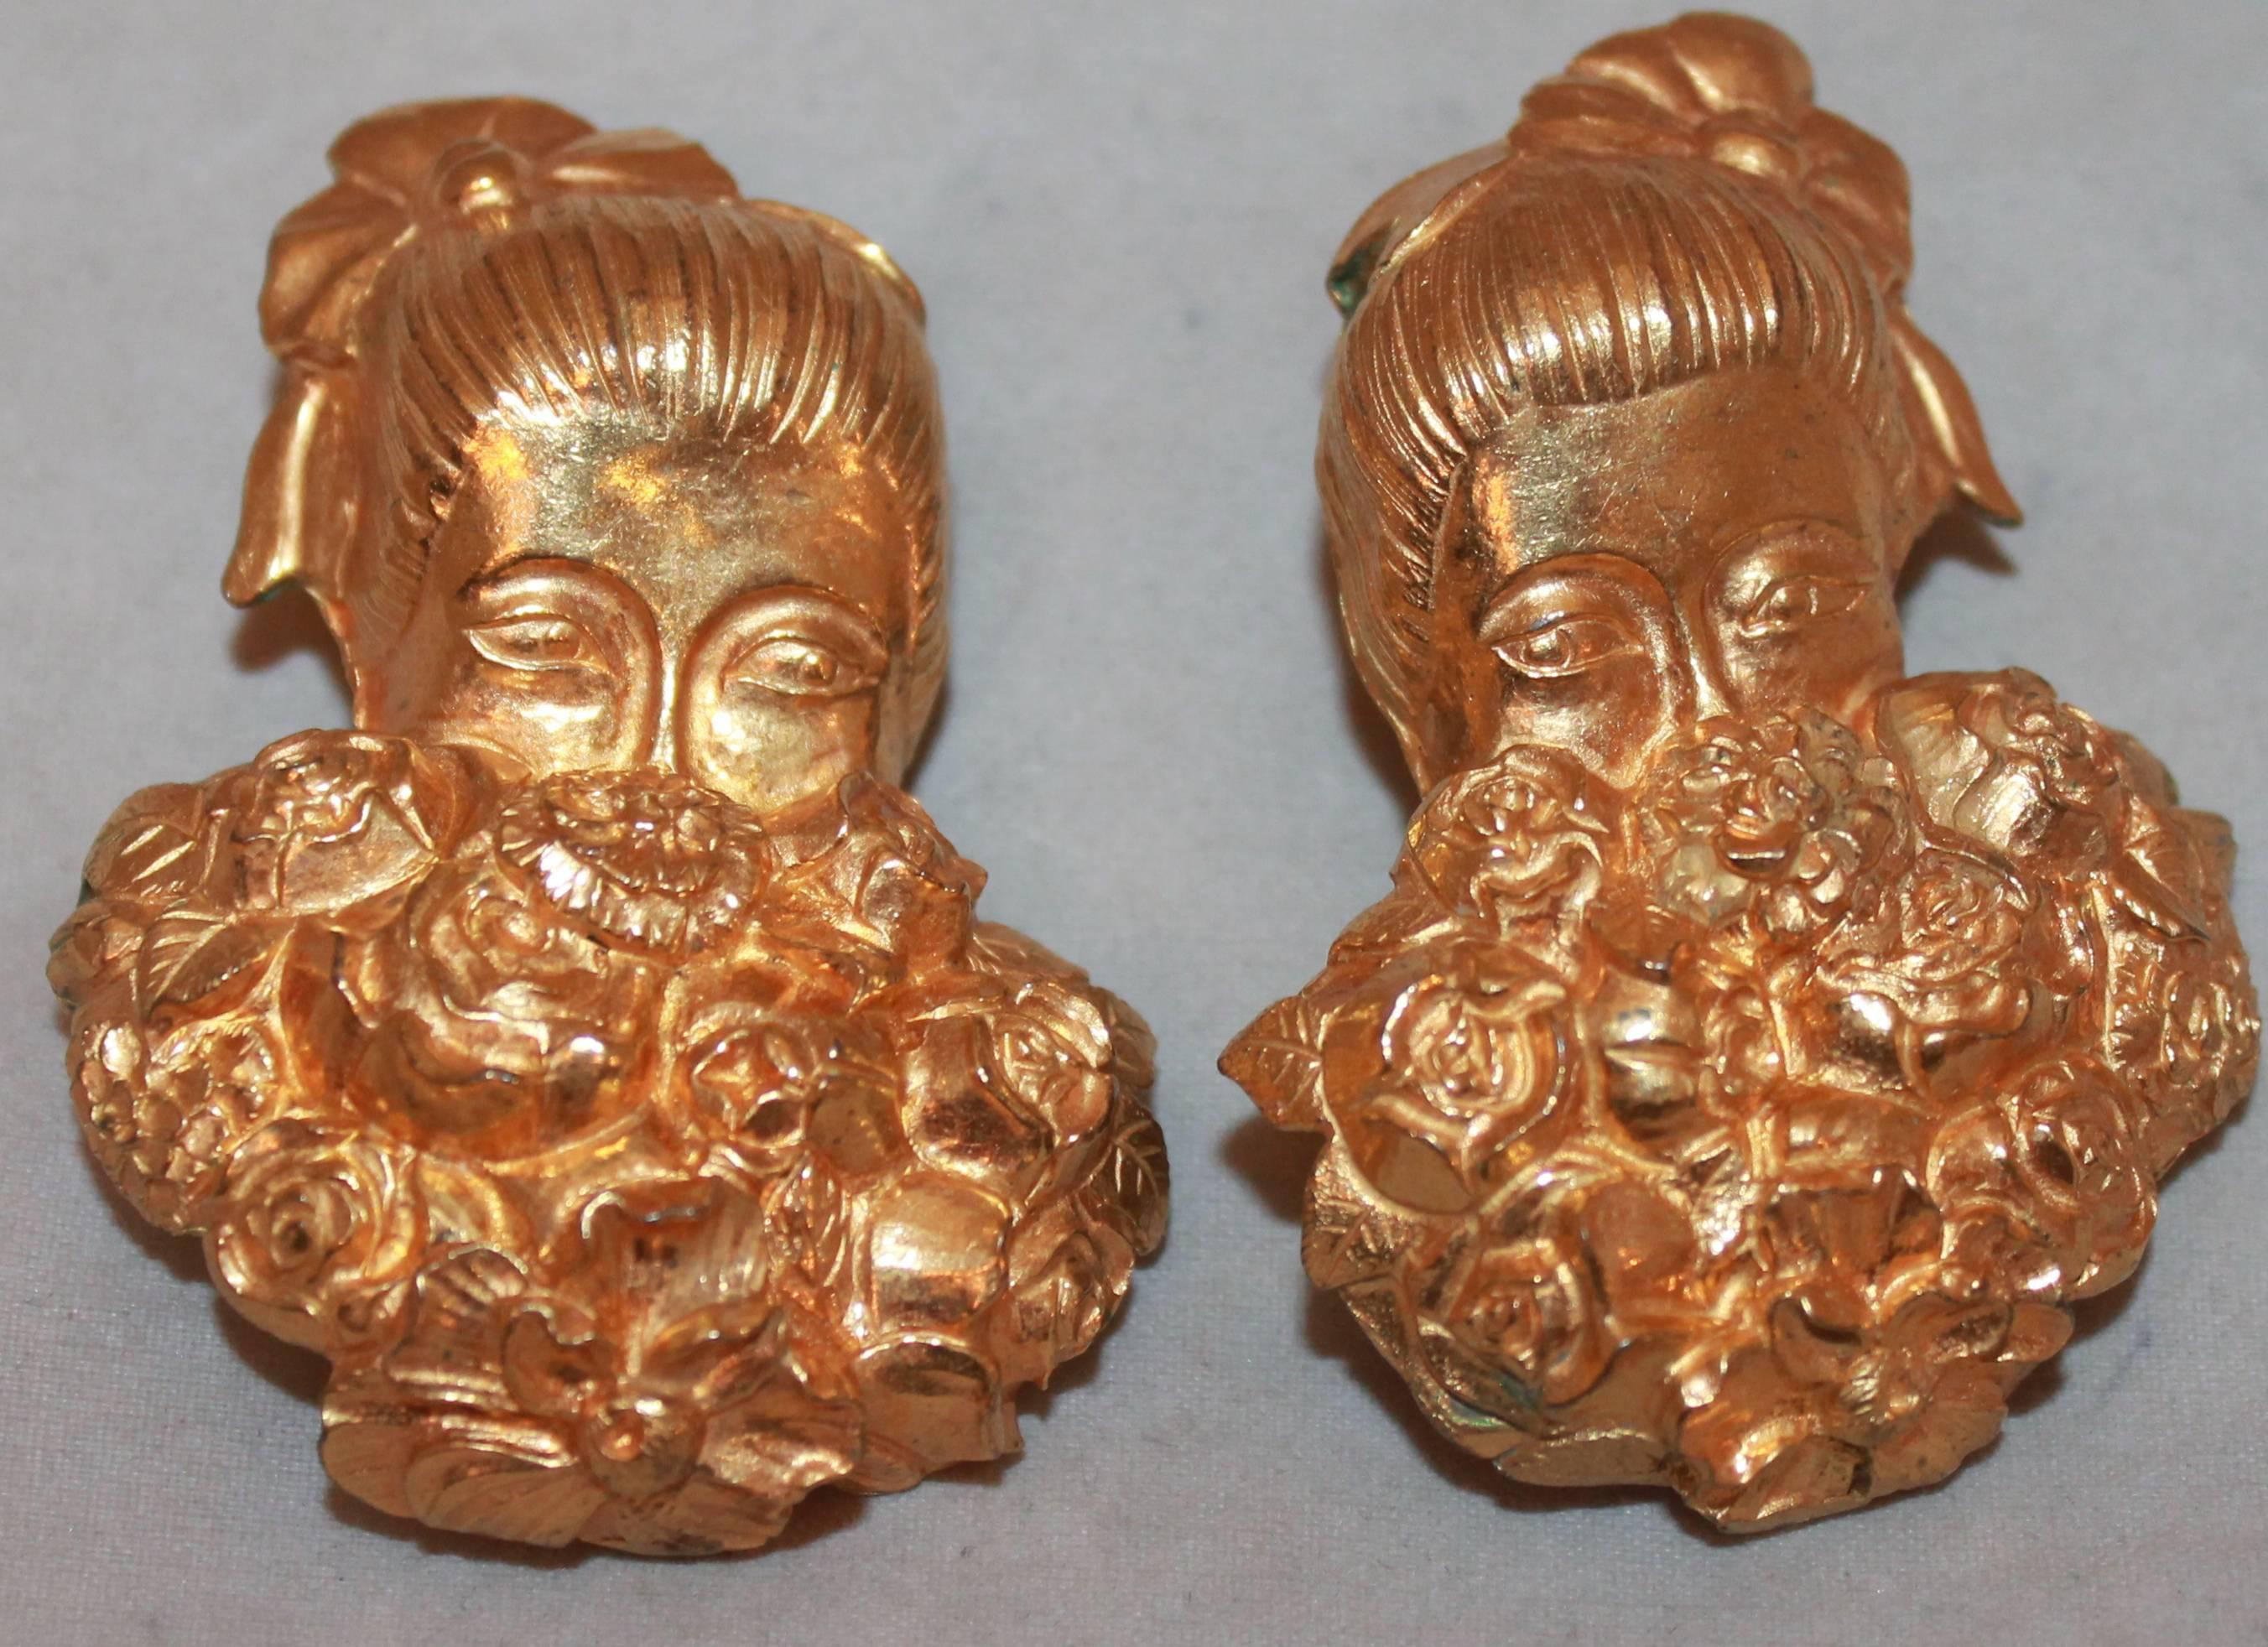 Isabel Canovas Vintage Goldtone Girl Behind Flower Bouquet Clip-On Earrings-Circa 1980's.  These earrings are in very good vintage condition with only some areas of green on the inside.  They feature a goldtone metal of a girl's face hiding behind a